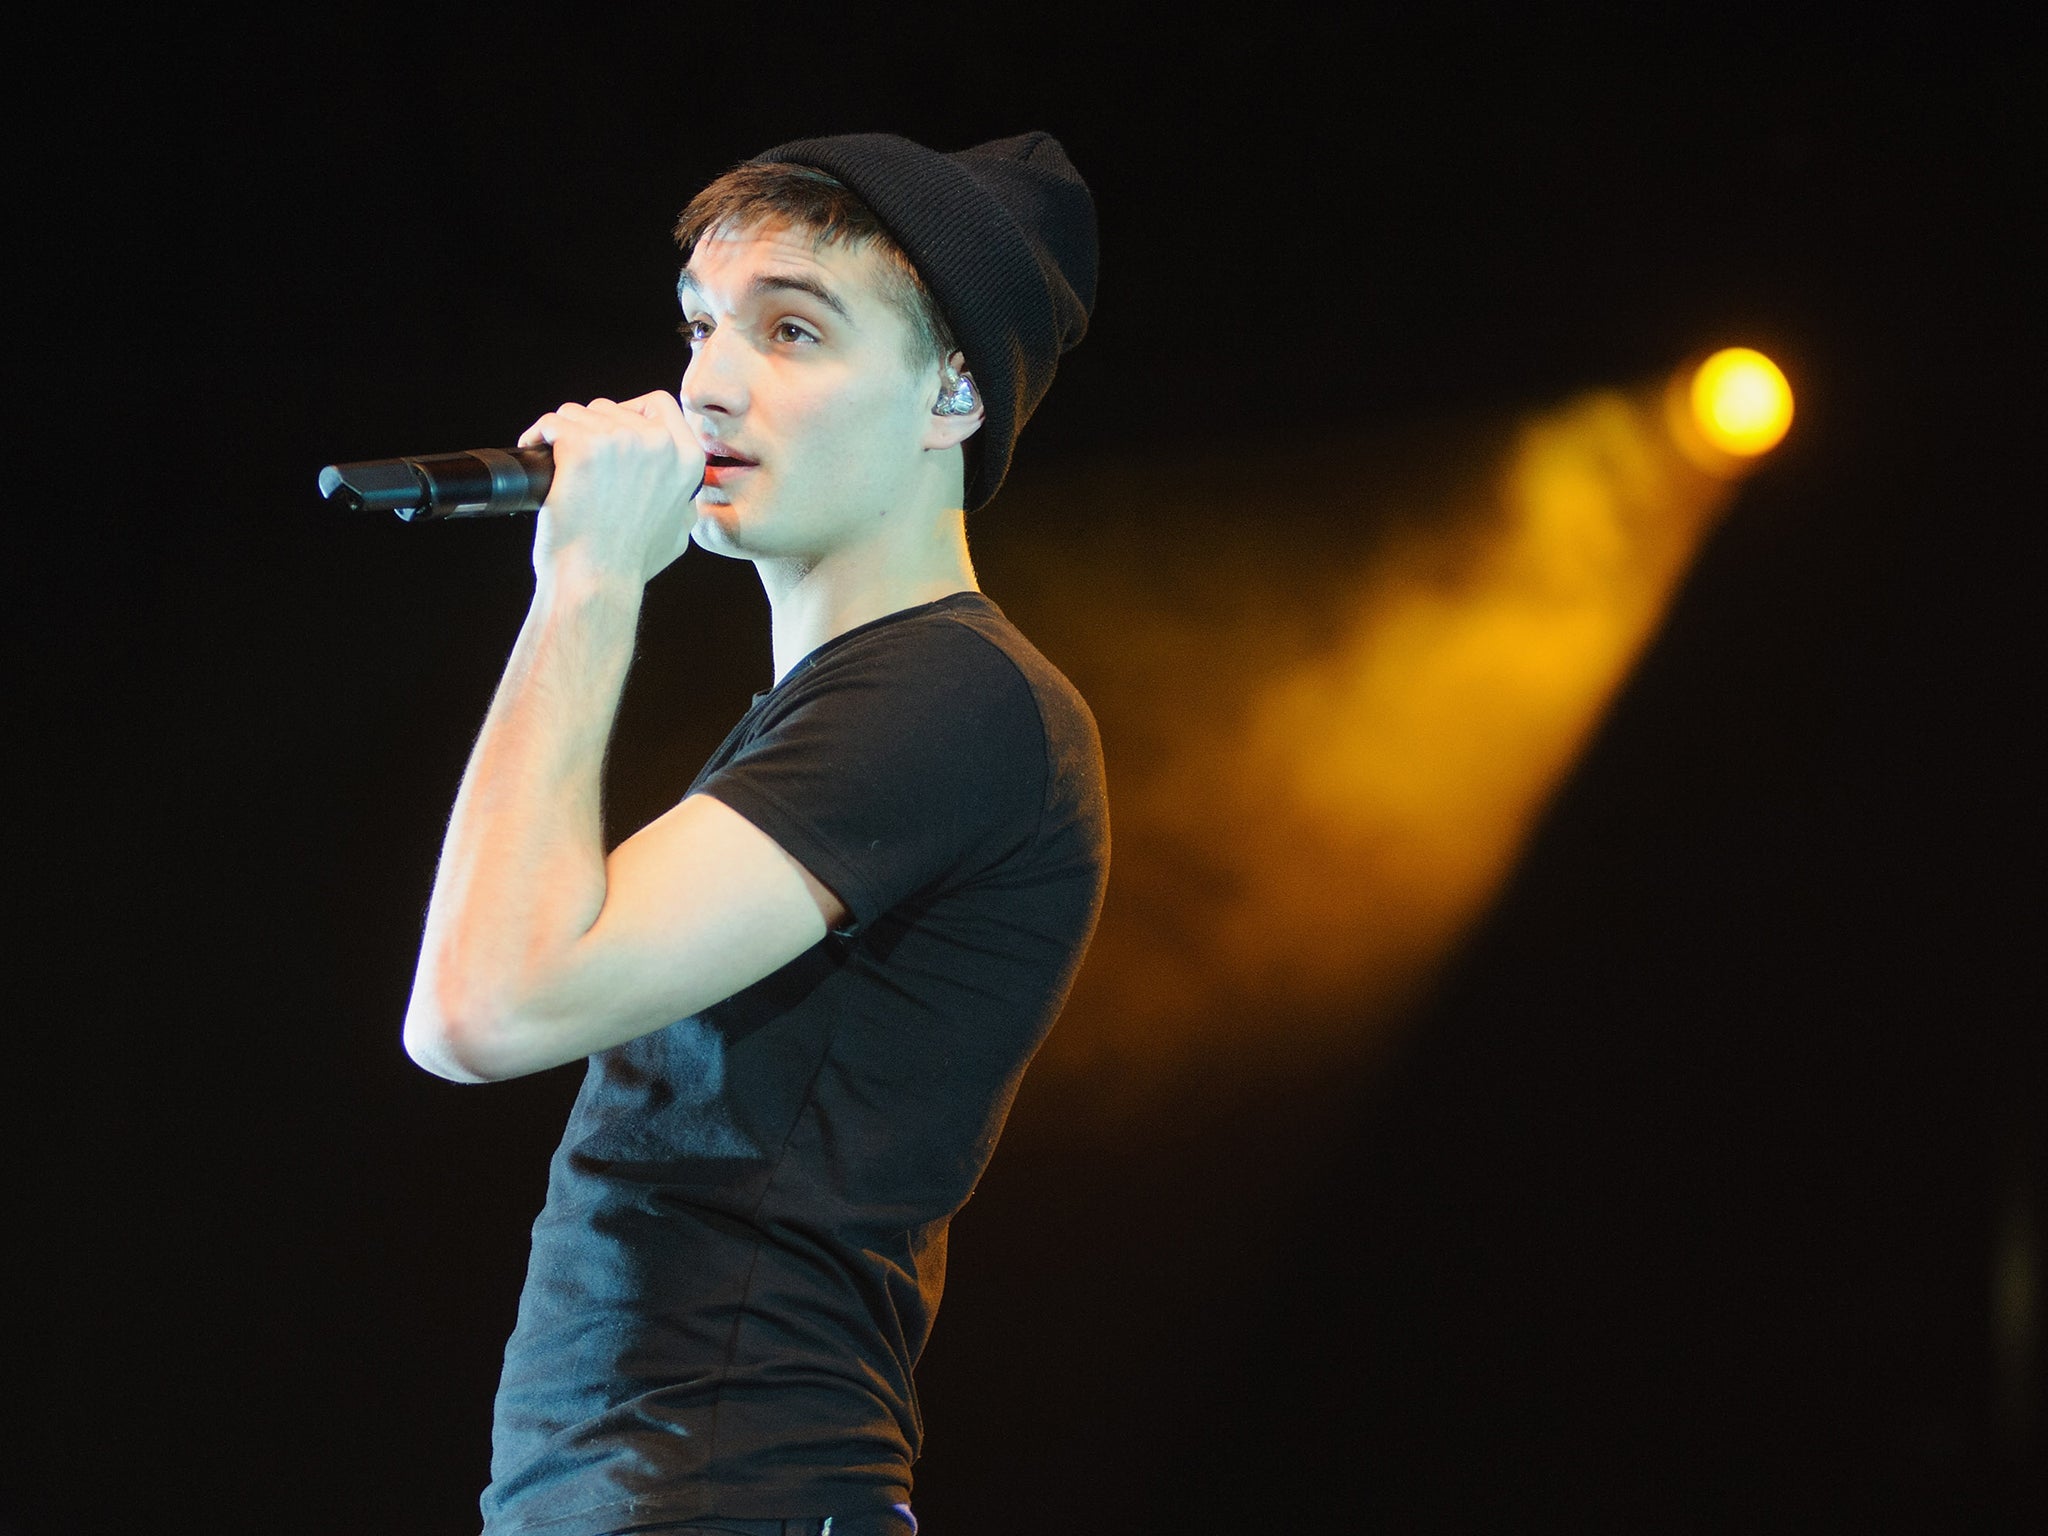 Parker on stage with The Wanted in 2013